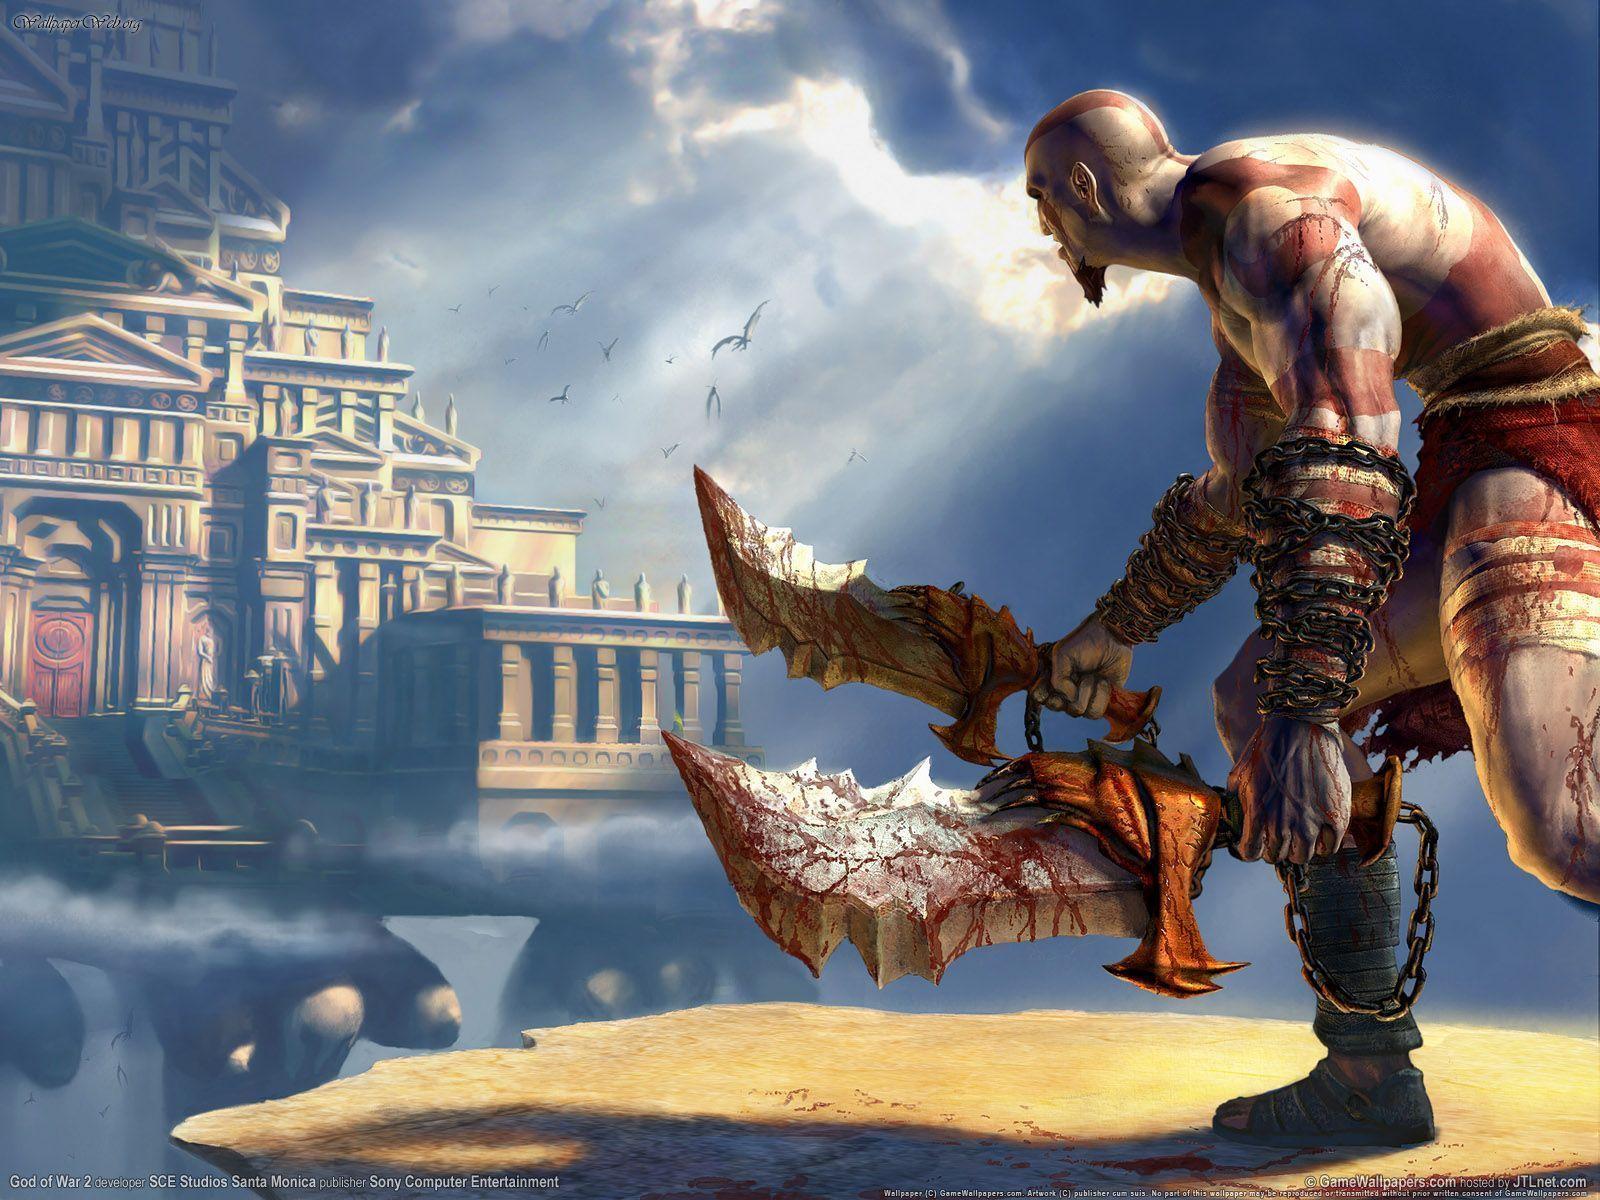 Games: God of War II, picture nr. 29647